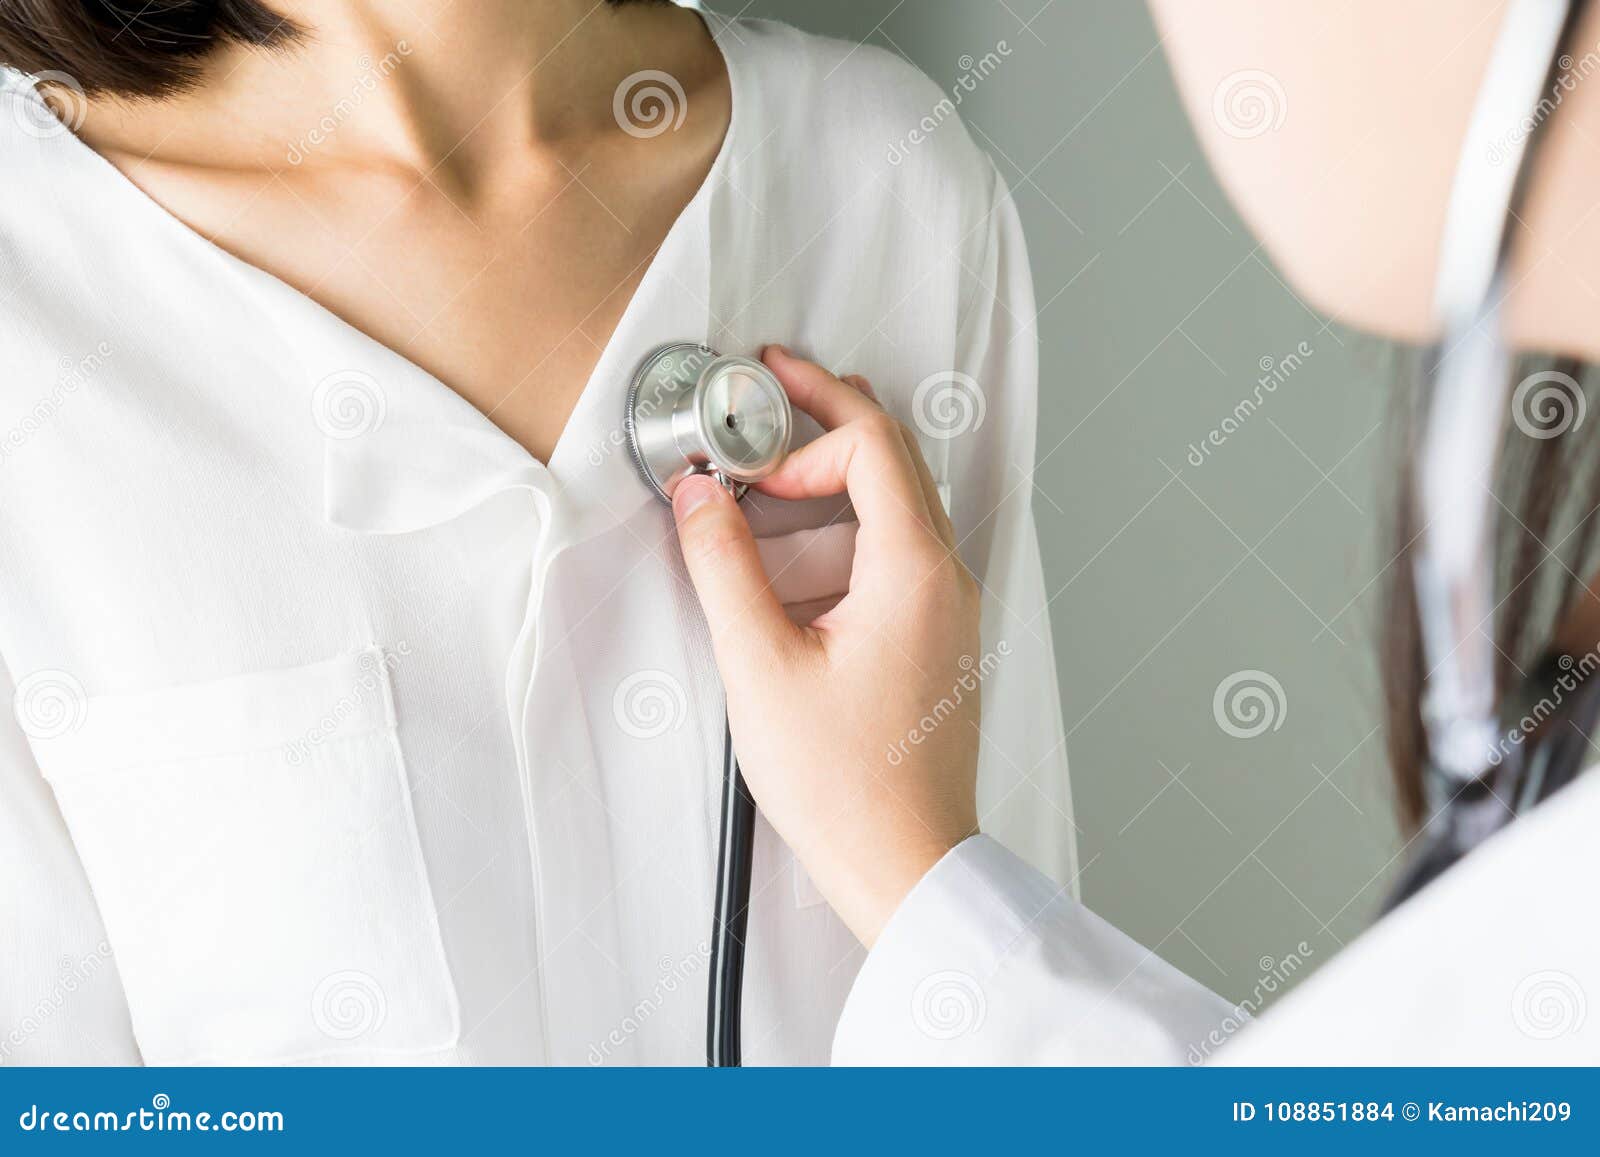 doctor is using a stethoscope for patients patient examination. to hear the heart rate, for patients with heart disease.